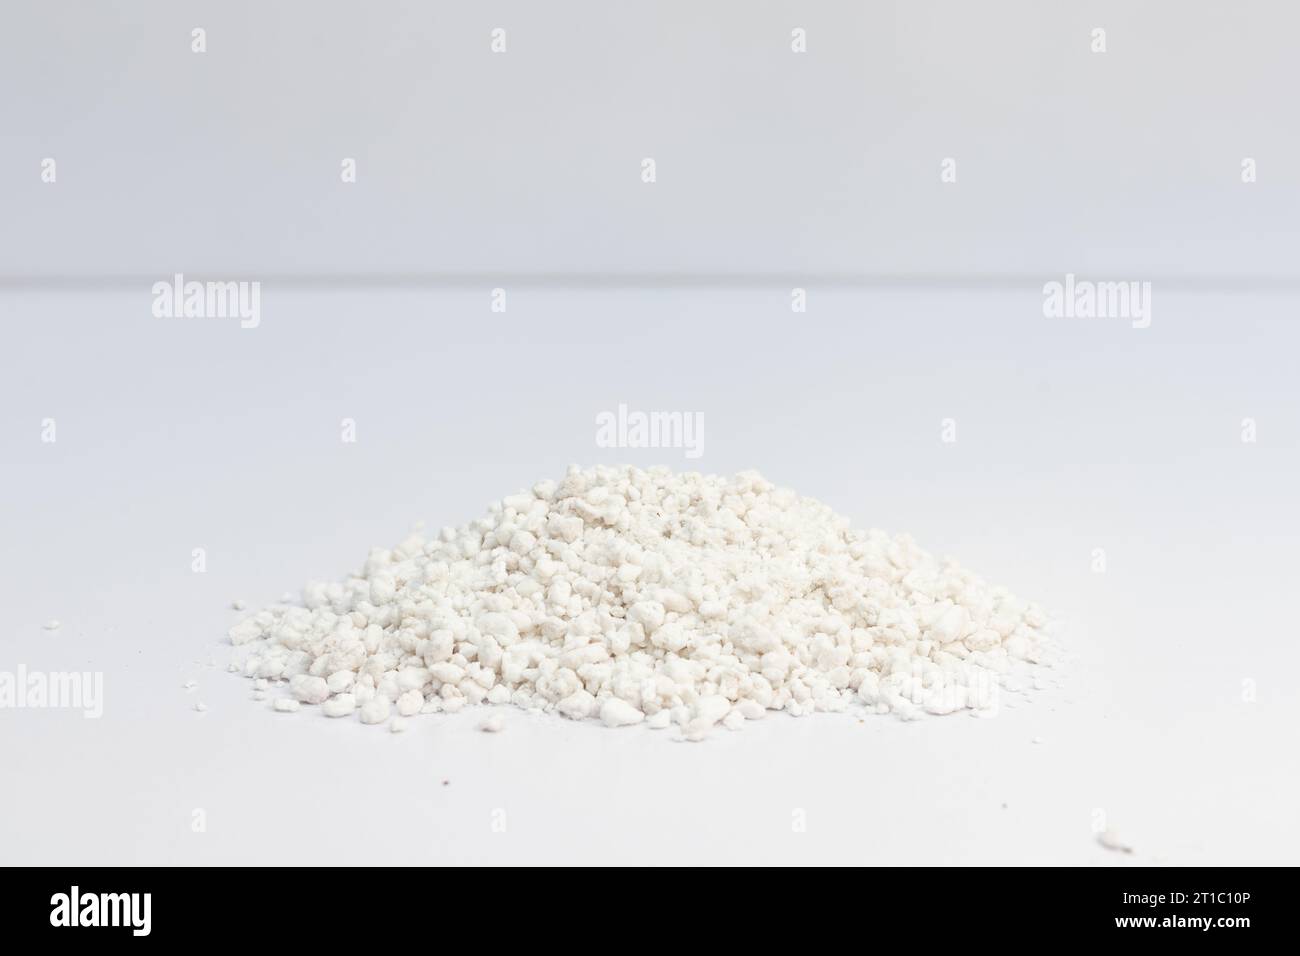 White perlite material for potting mix of cactus, succulent and hydroponic plant soil. Stock Photo